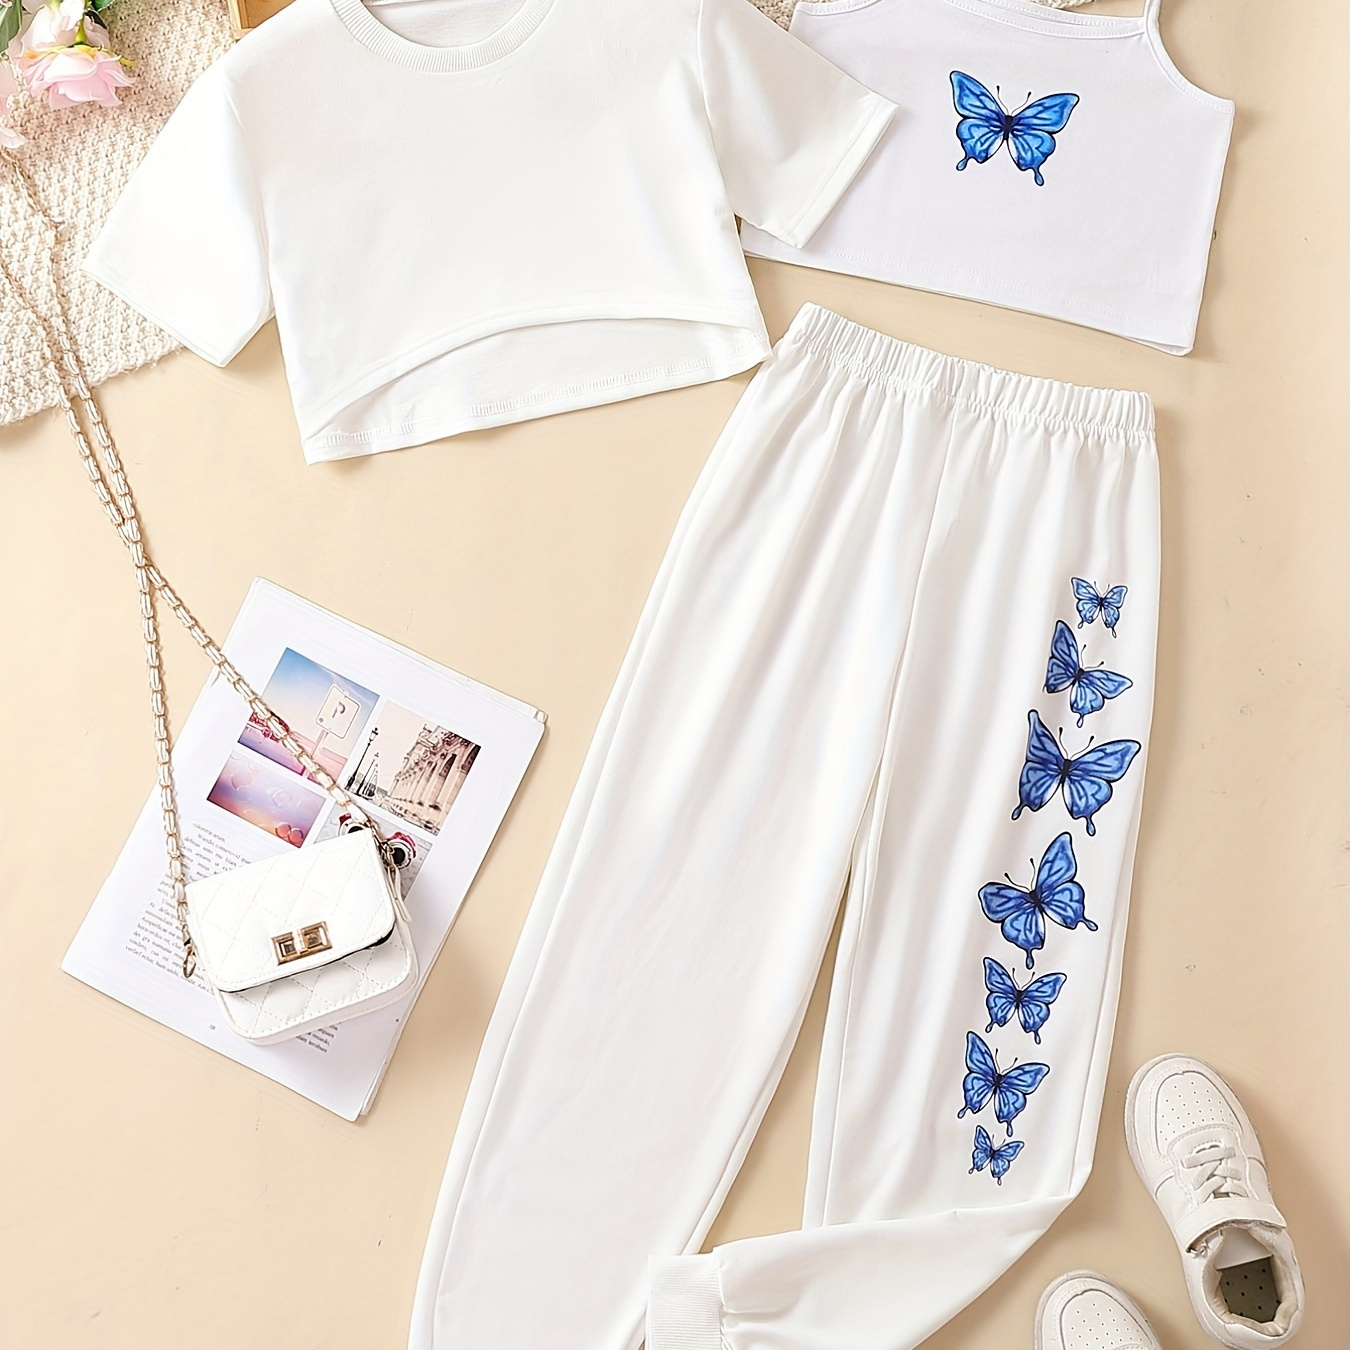 

Girls 3pcs Butterfly Graphic Casual Suit Camisole, Short Sleeve T-shirt Cover Up And Pants Set Kids Sports Leisure Suits Outfit